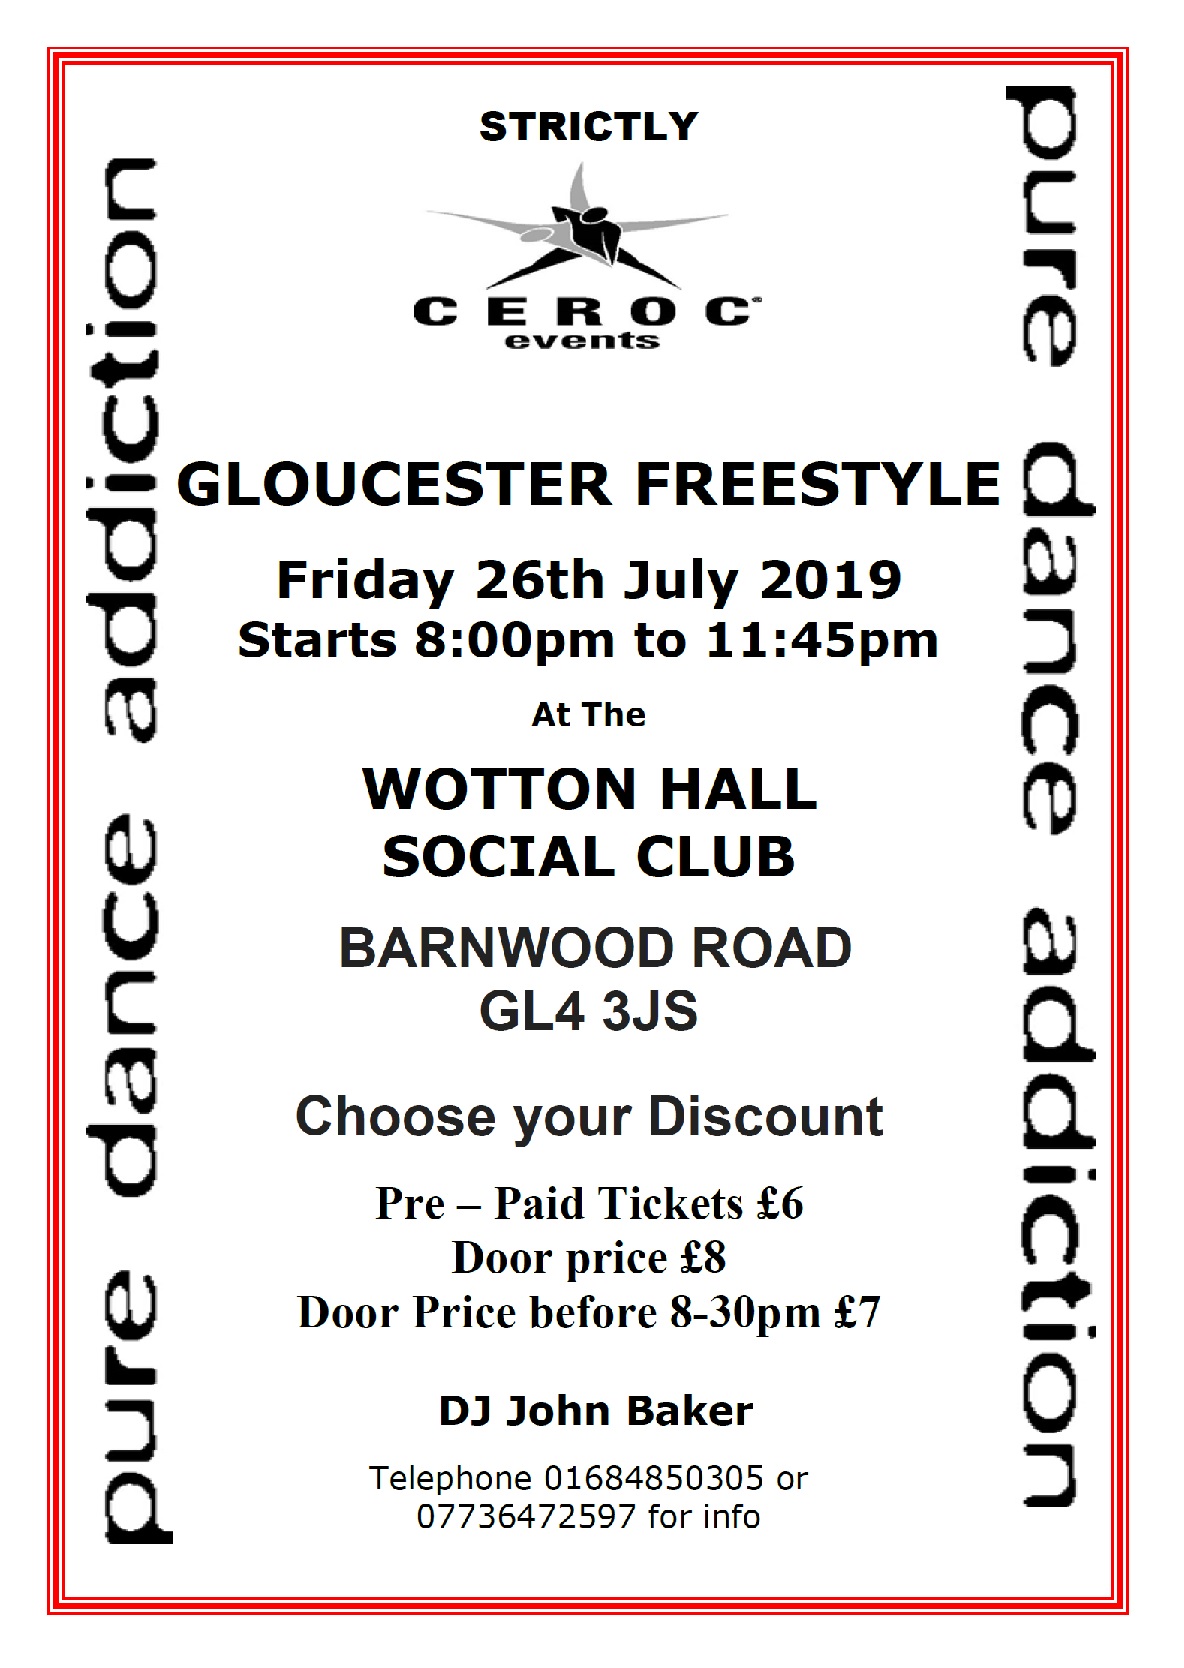 JULY 26TH 2019 CEROC Gloucester freestylE